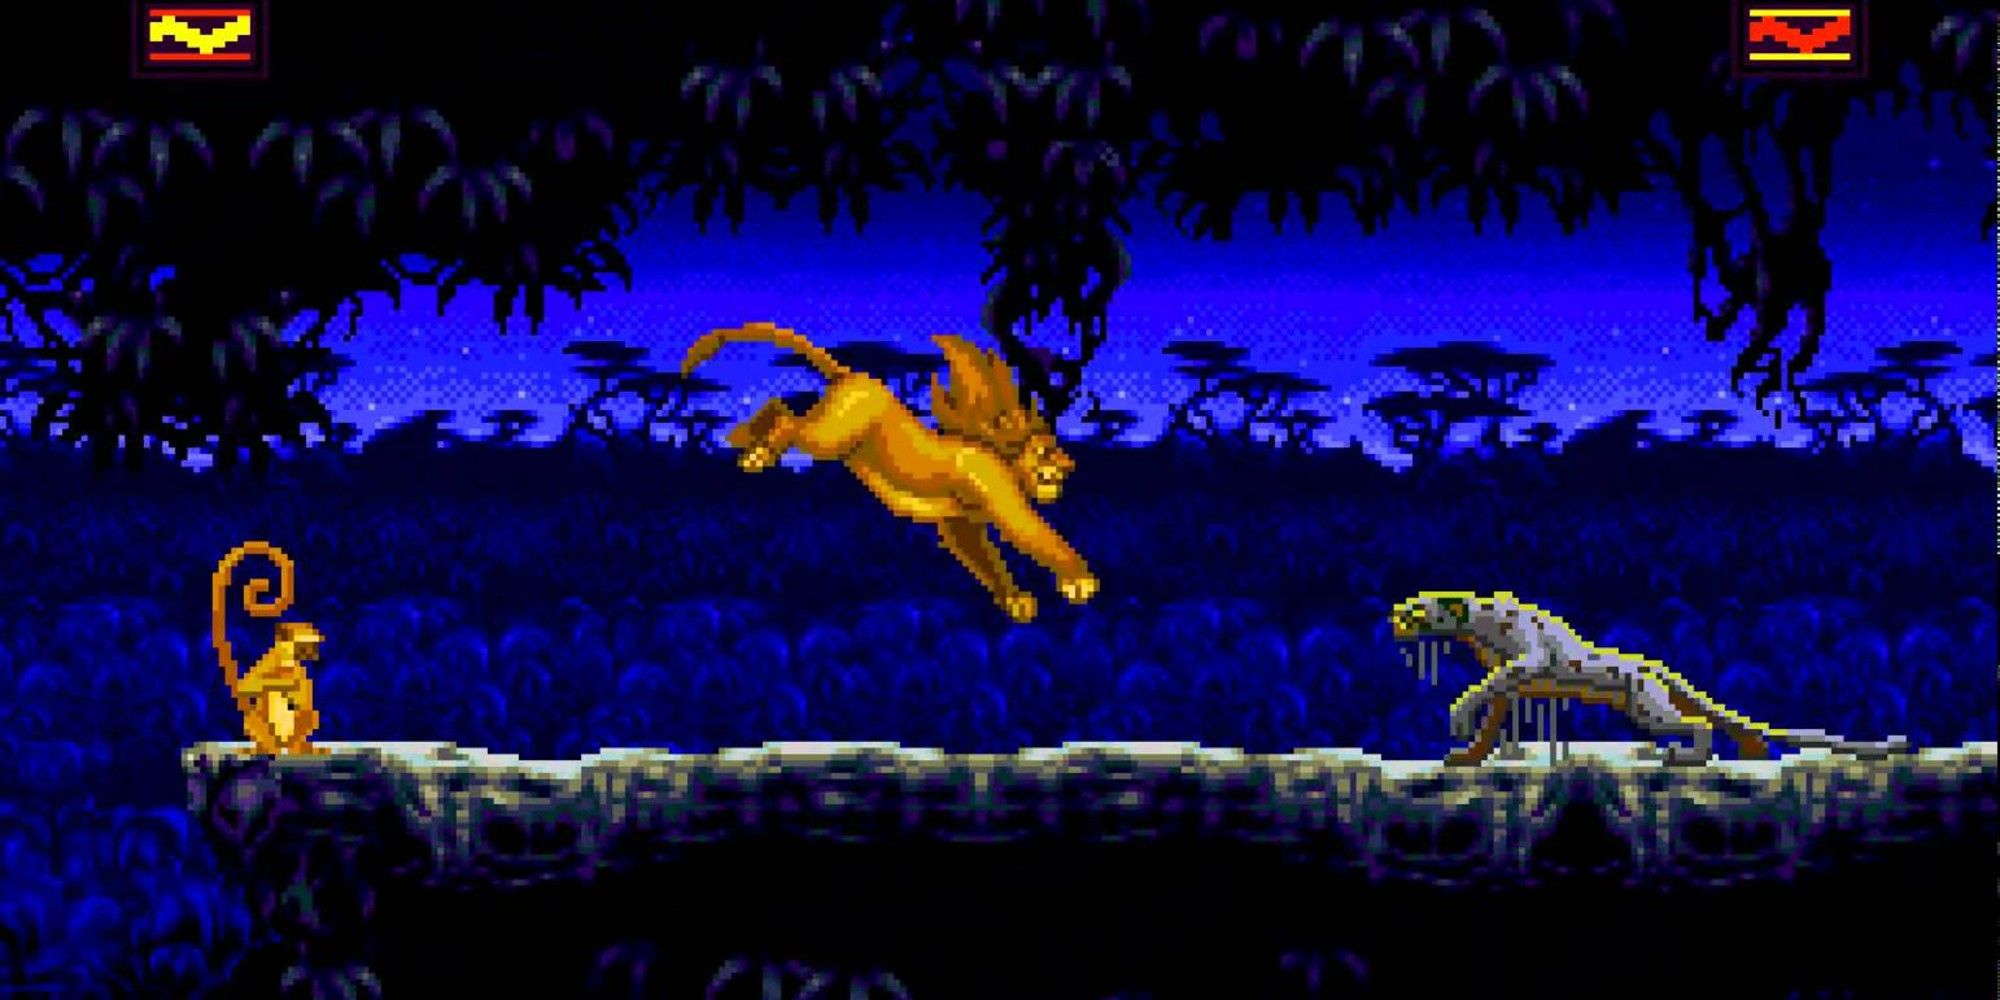 An image of a Lion King level with Simba in mid-air above rocky terrain